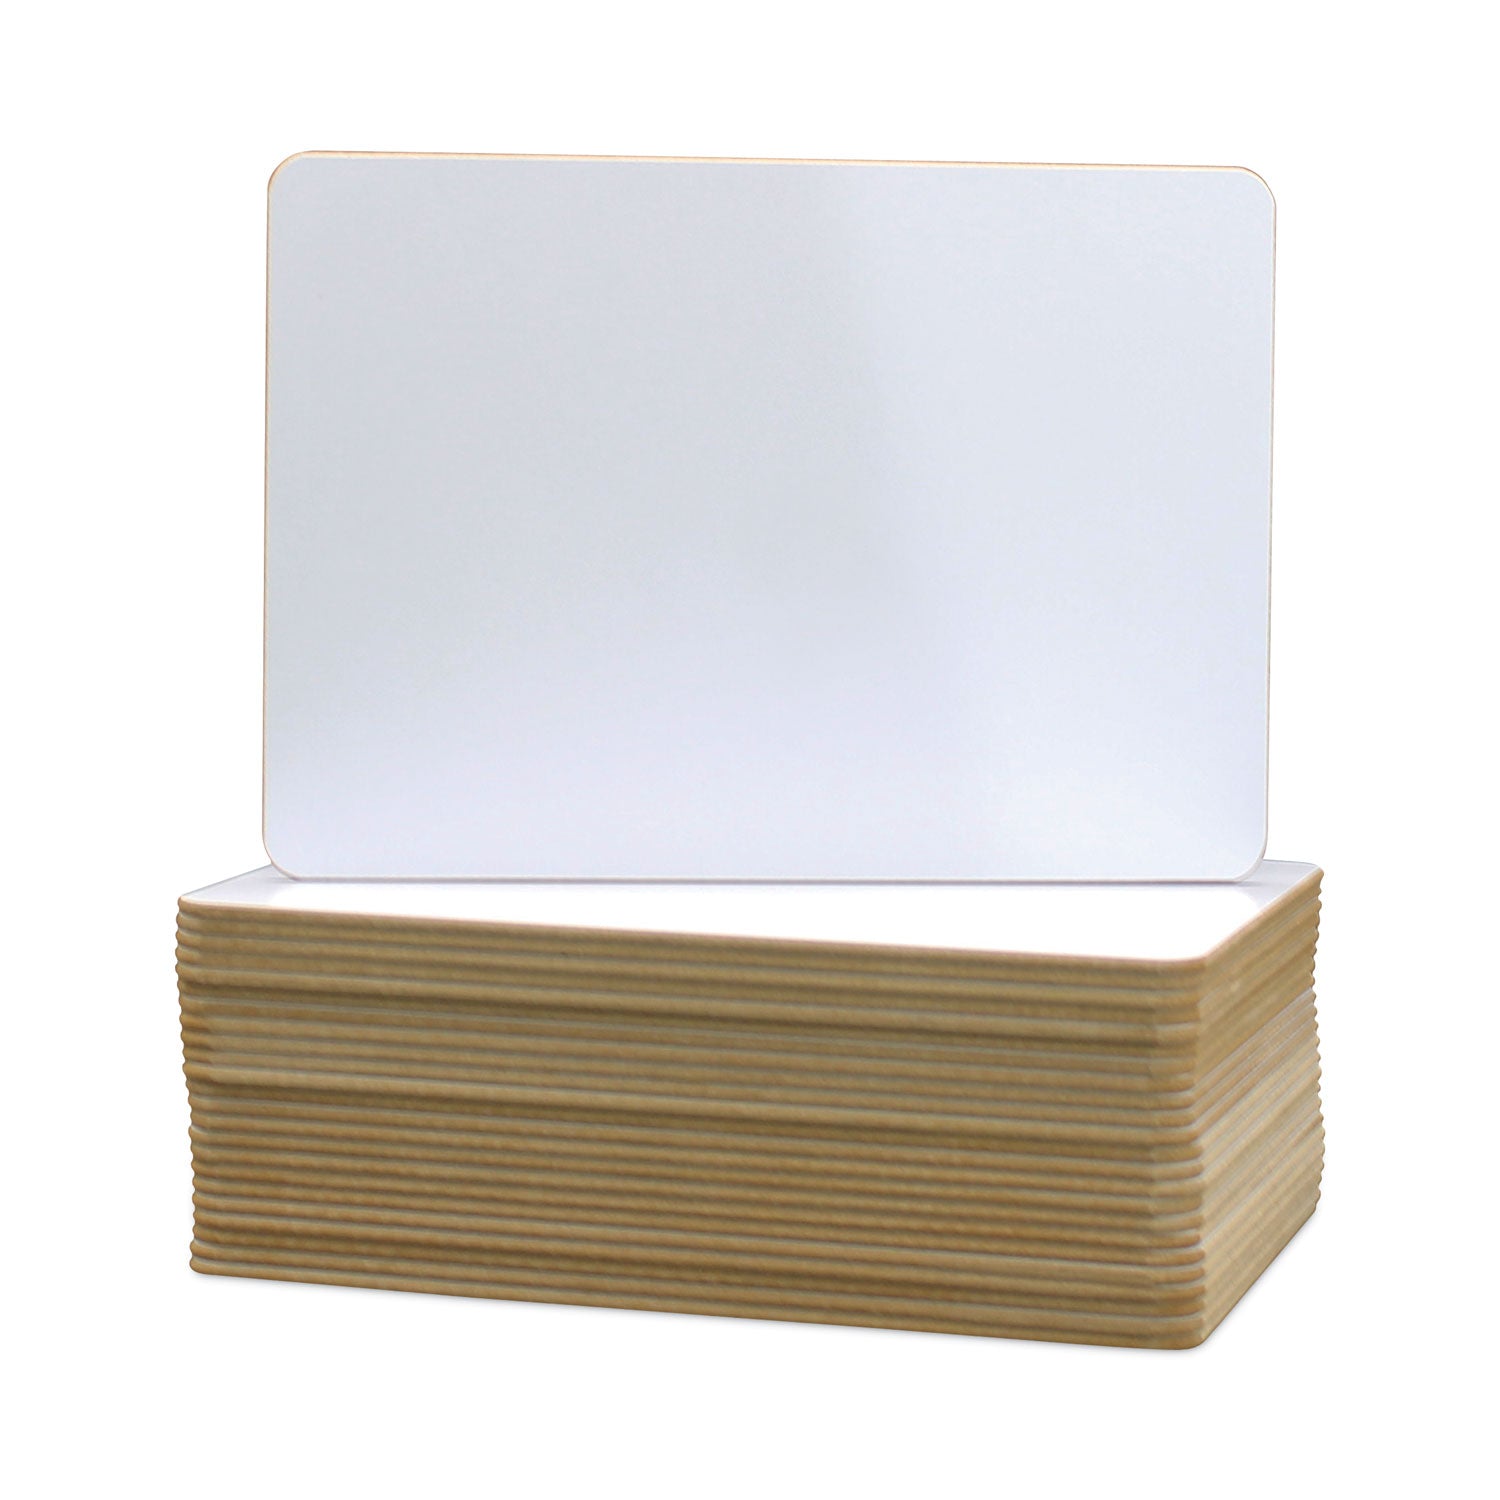 two-sided-dry-erase-board-7-x-5-white-front-back-surface-24-pack_flp45656 - 2